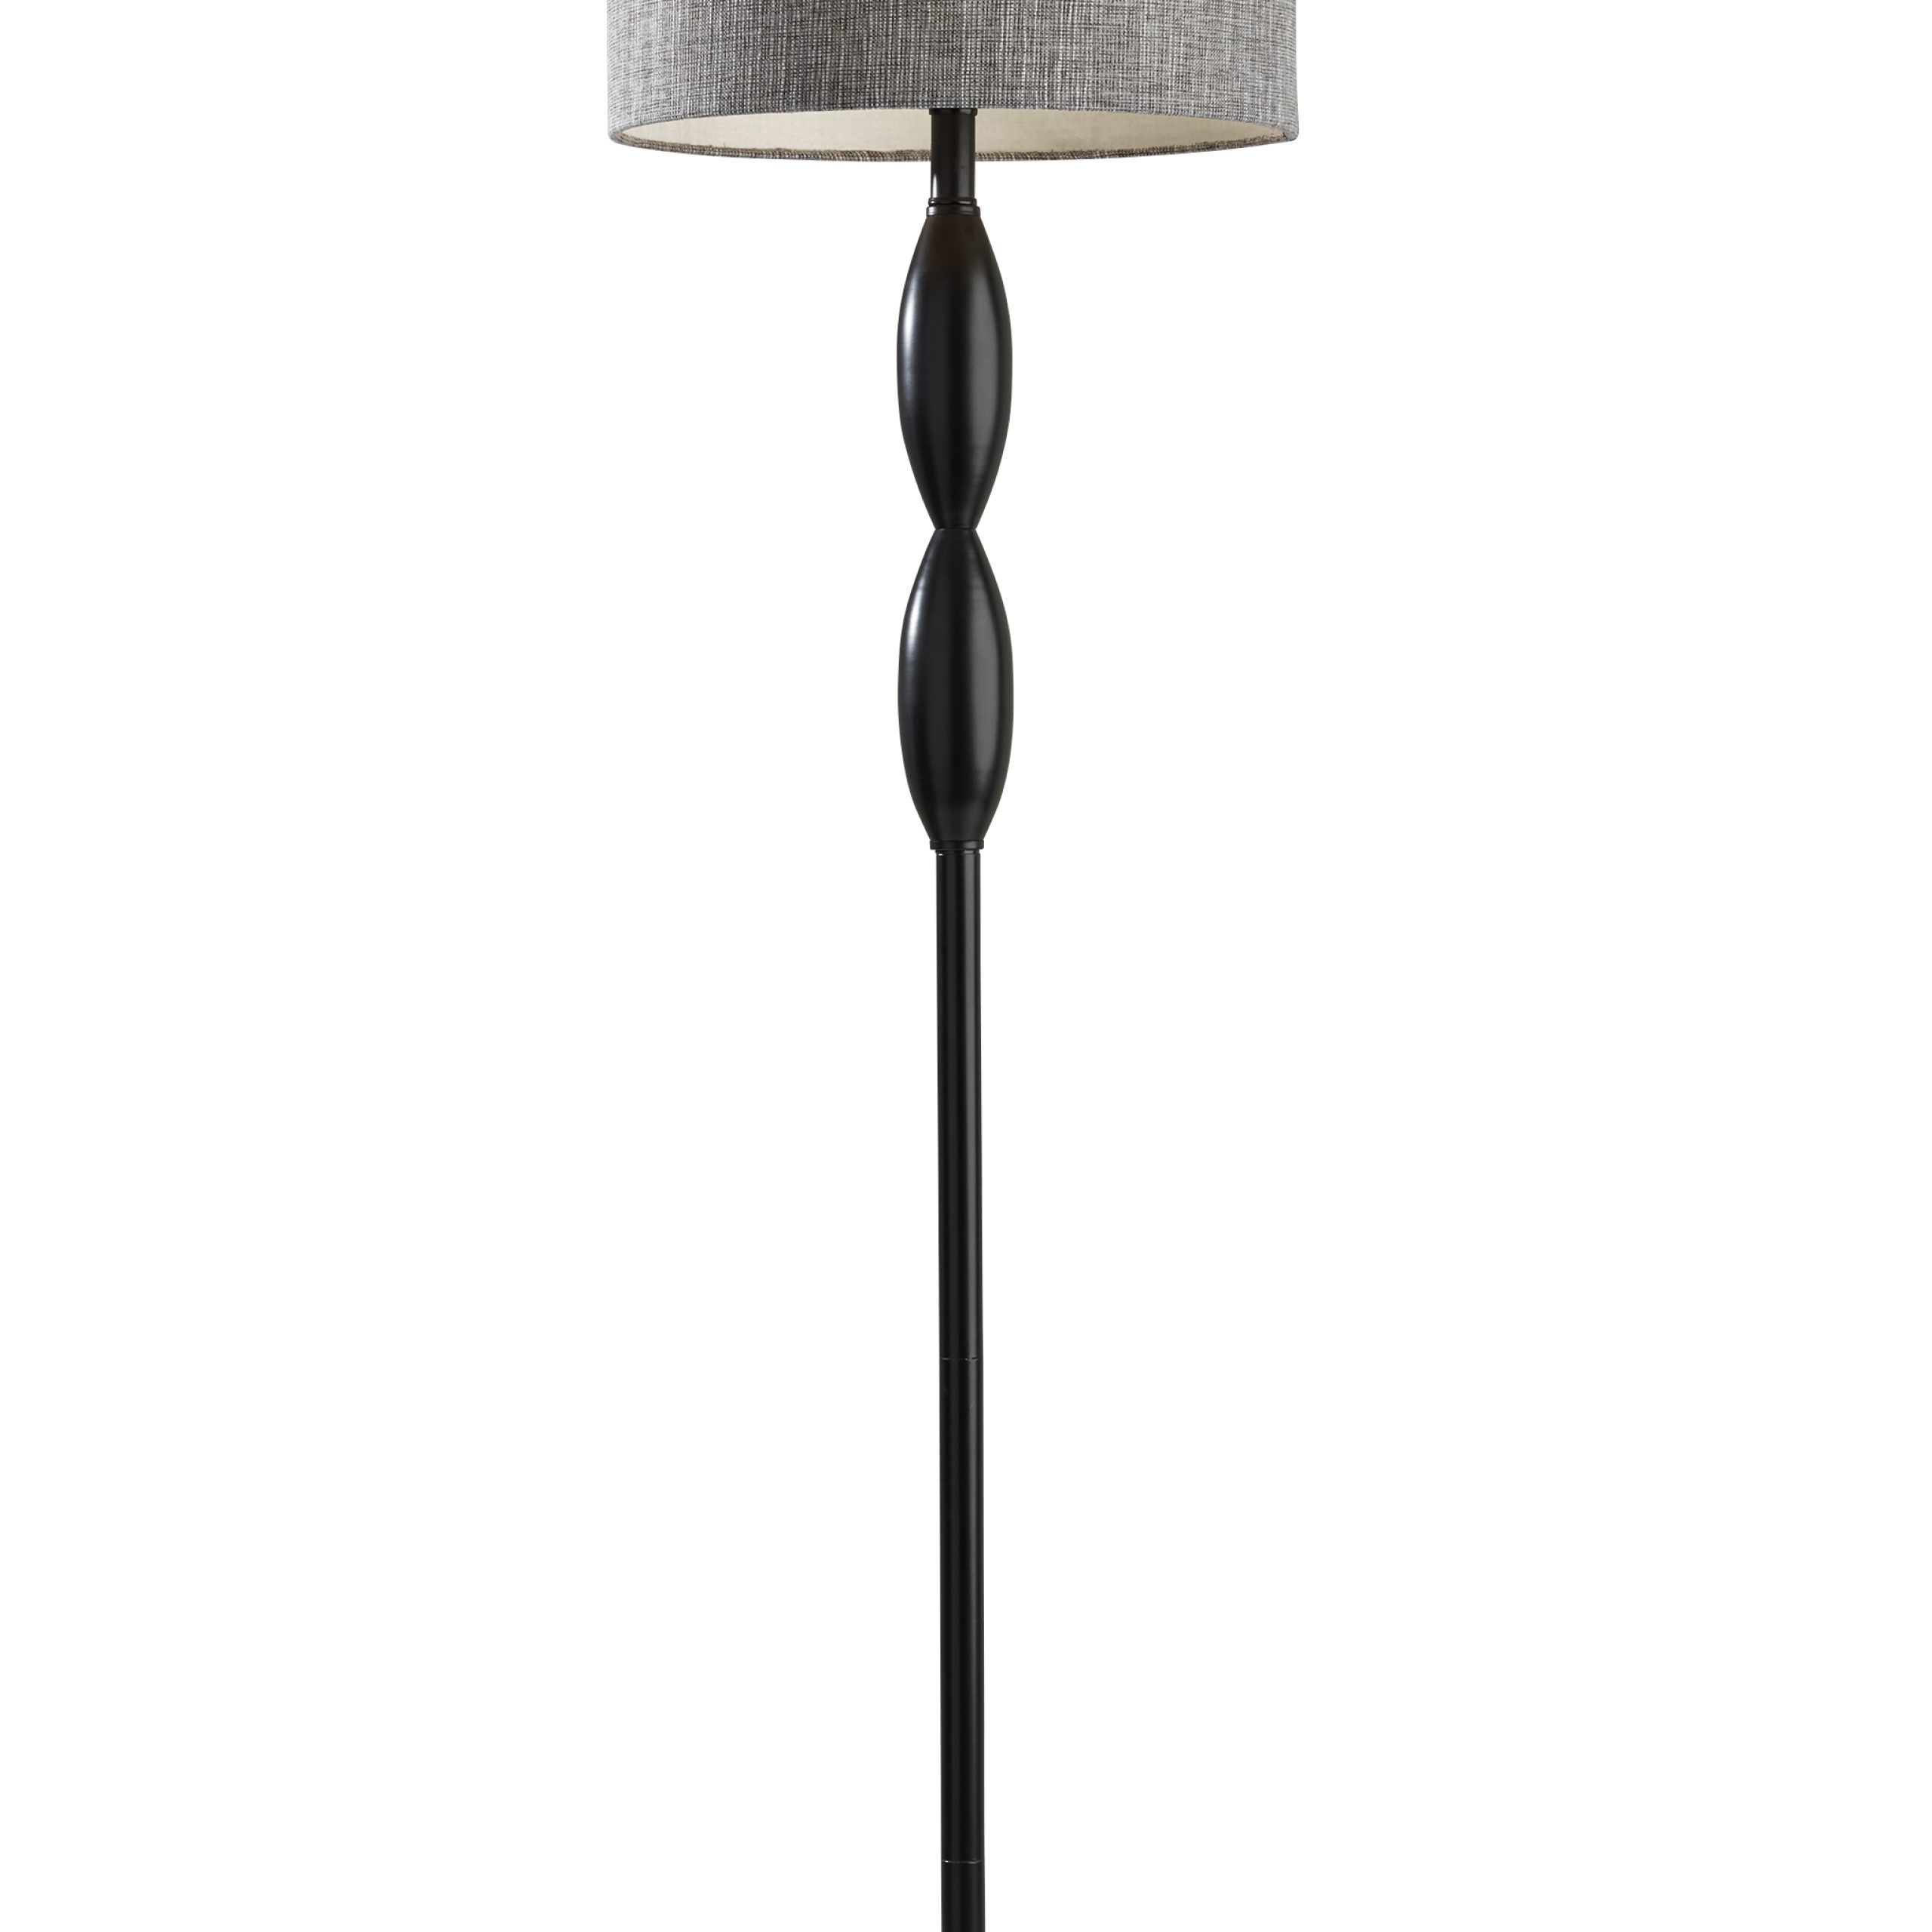 Adesso Lance Floor Lamp Black, Dark Grey And White Textured Fabric Shade –  Walmart Throughout Grey Textured Floor Lamps (View 5 of 20)